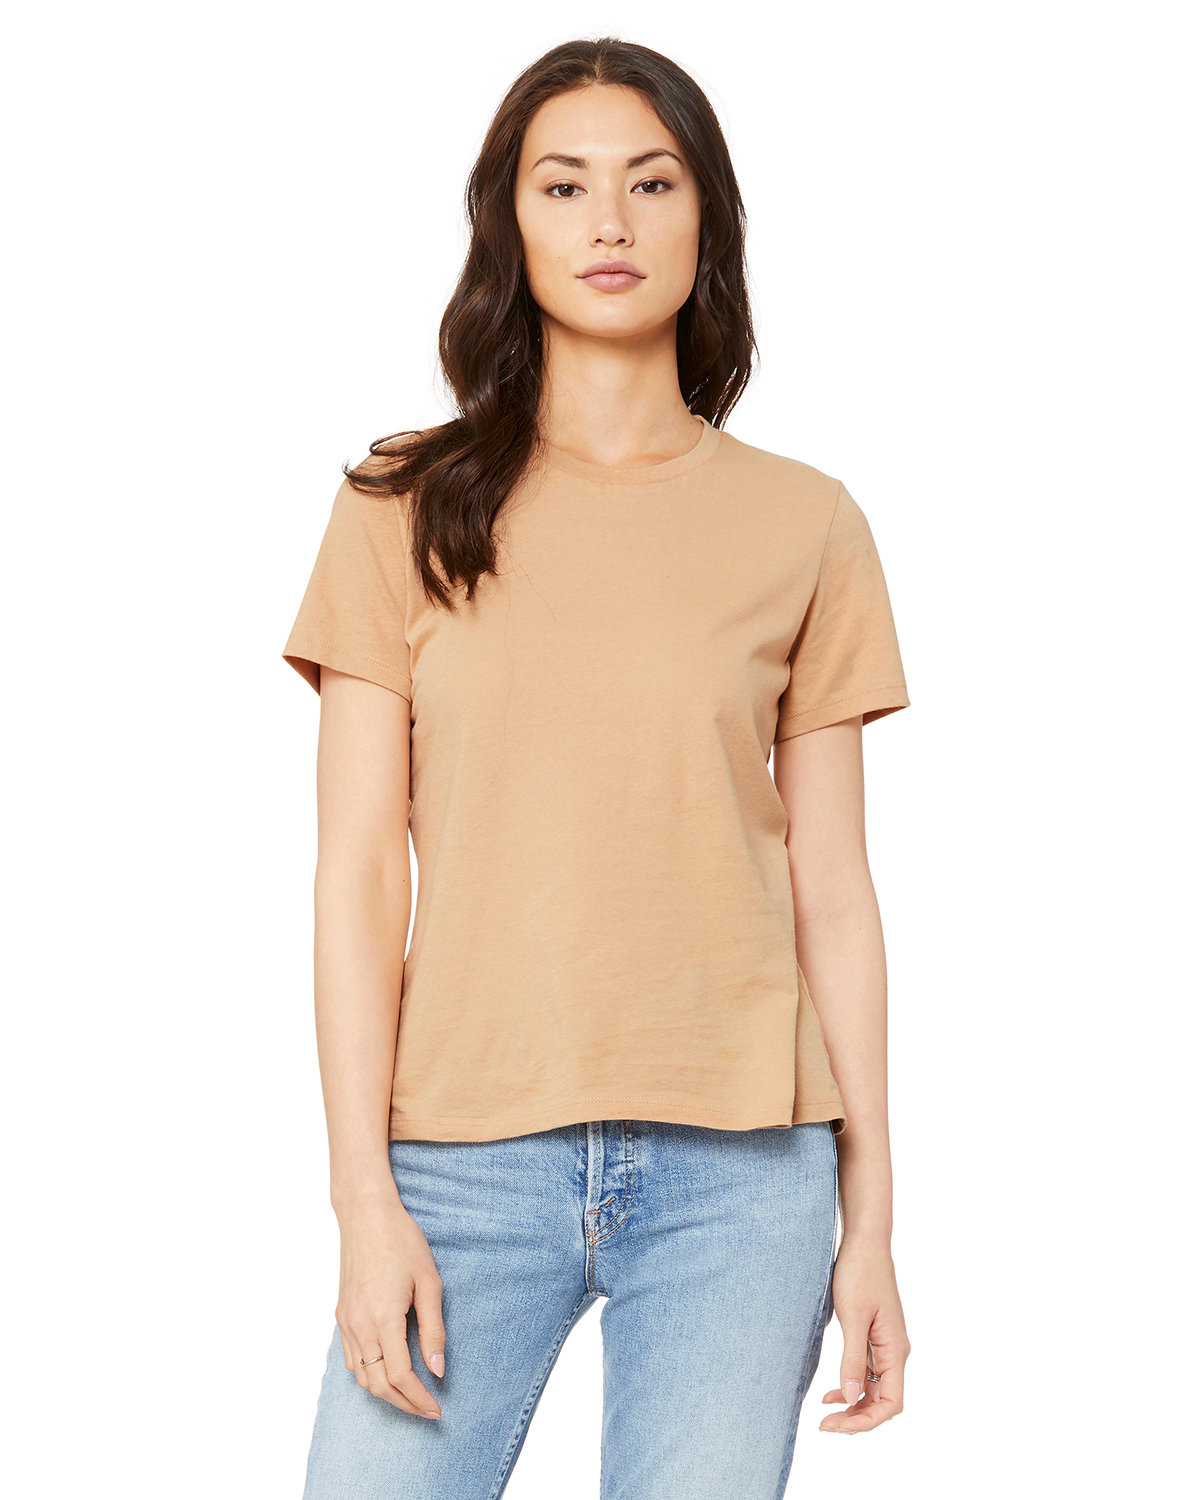 Bella + Canvas Ladies' Relaxed Jersey Short-Sleeve T-Shirt SAND DUNE 